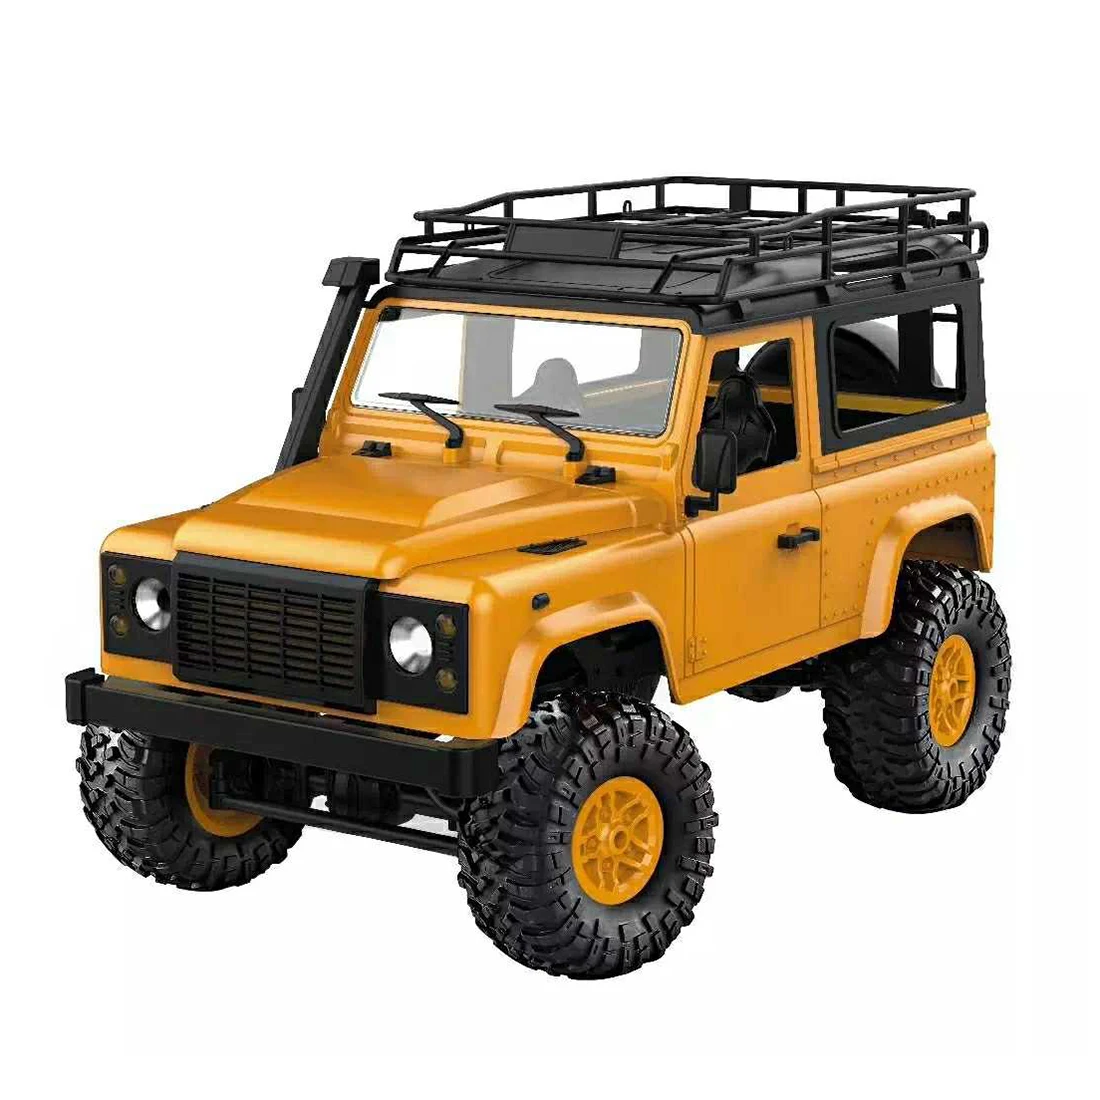 

MN90 1:12 4WD 2.4G RC Climbing Car D90 RC Off-Road Model Vehicle For Child Education Birthday Gift -RTR Version Yellow Red Green